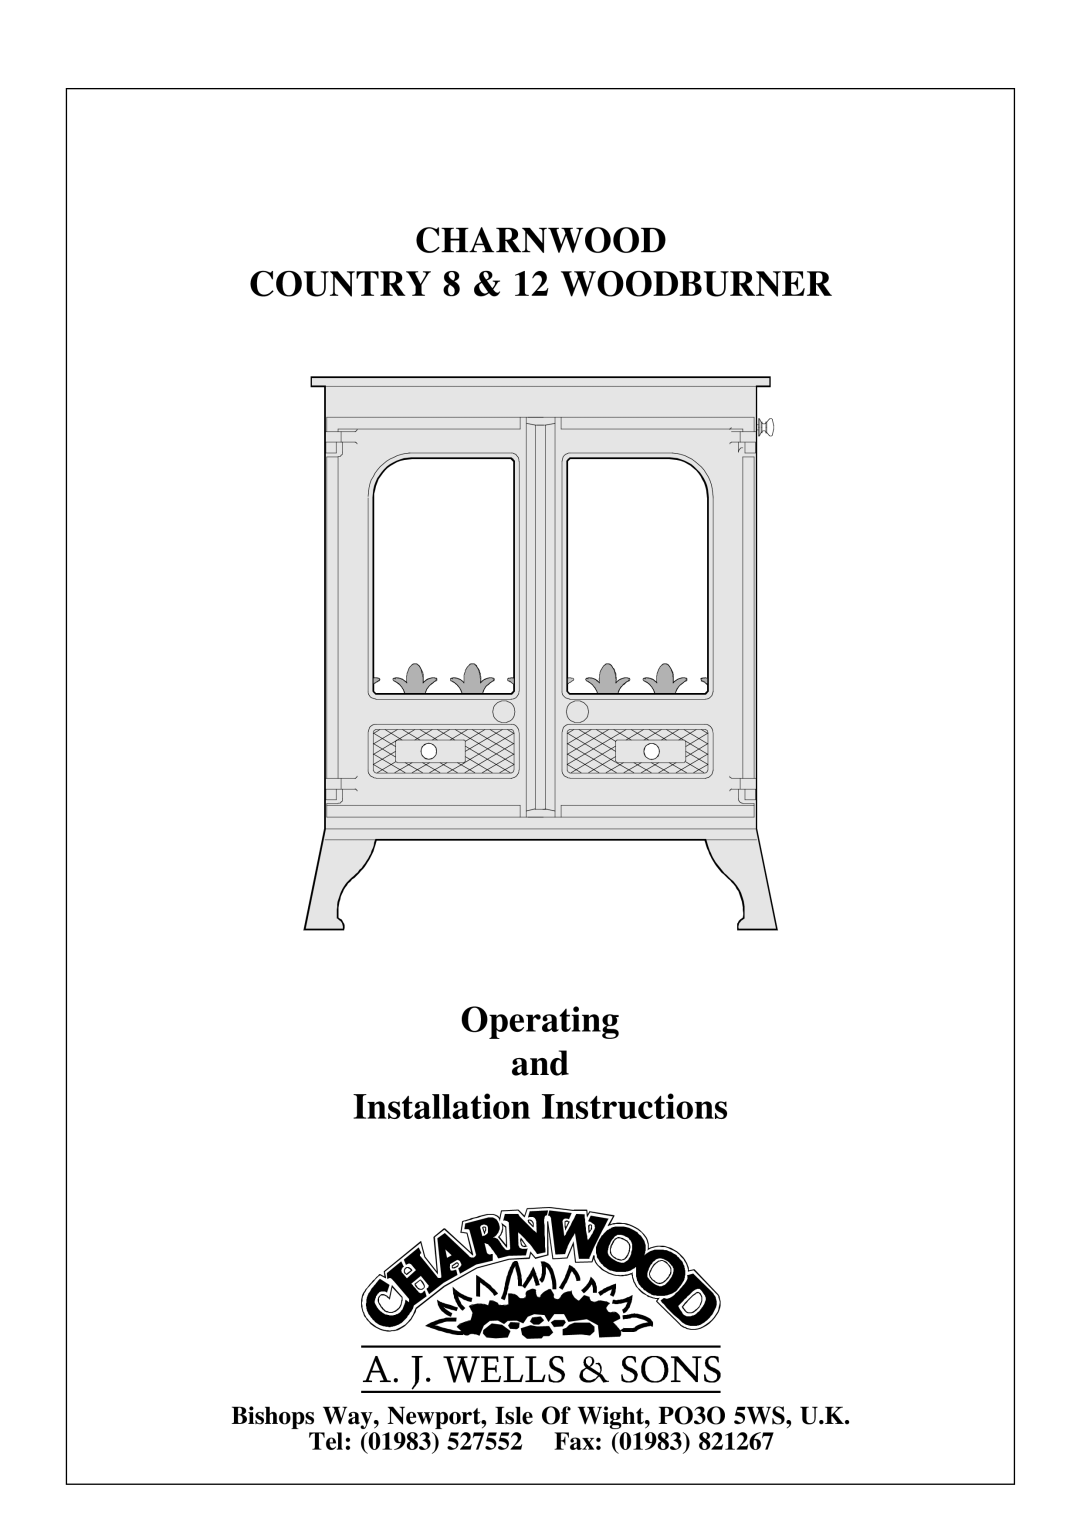 Charnwood installation instructions CHARNWOOD COUNTRY 8 & 12 WOODBURNER Operating and, Installation Instructions 